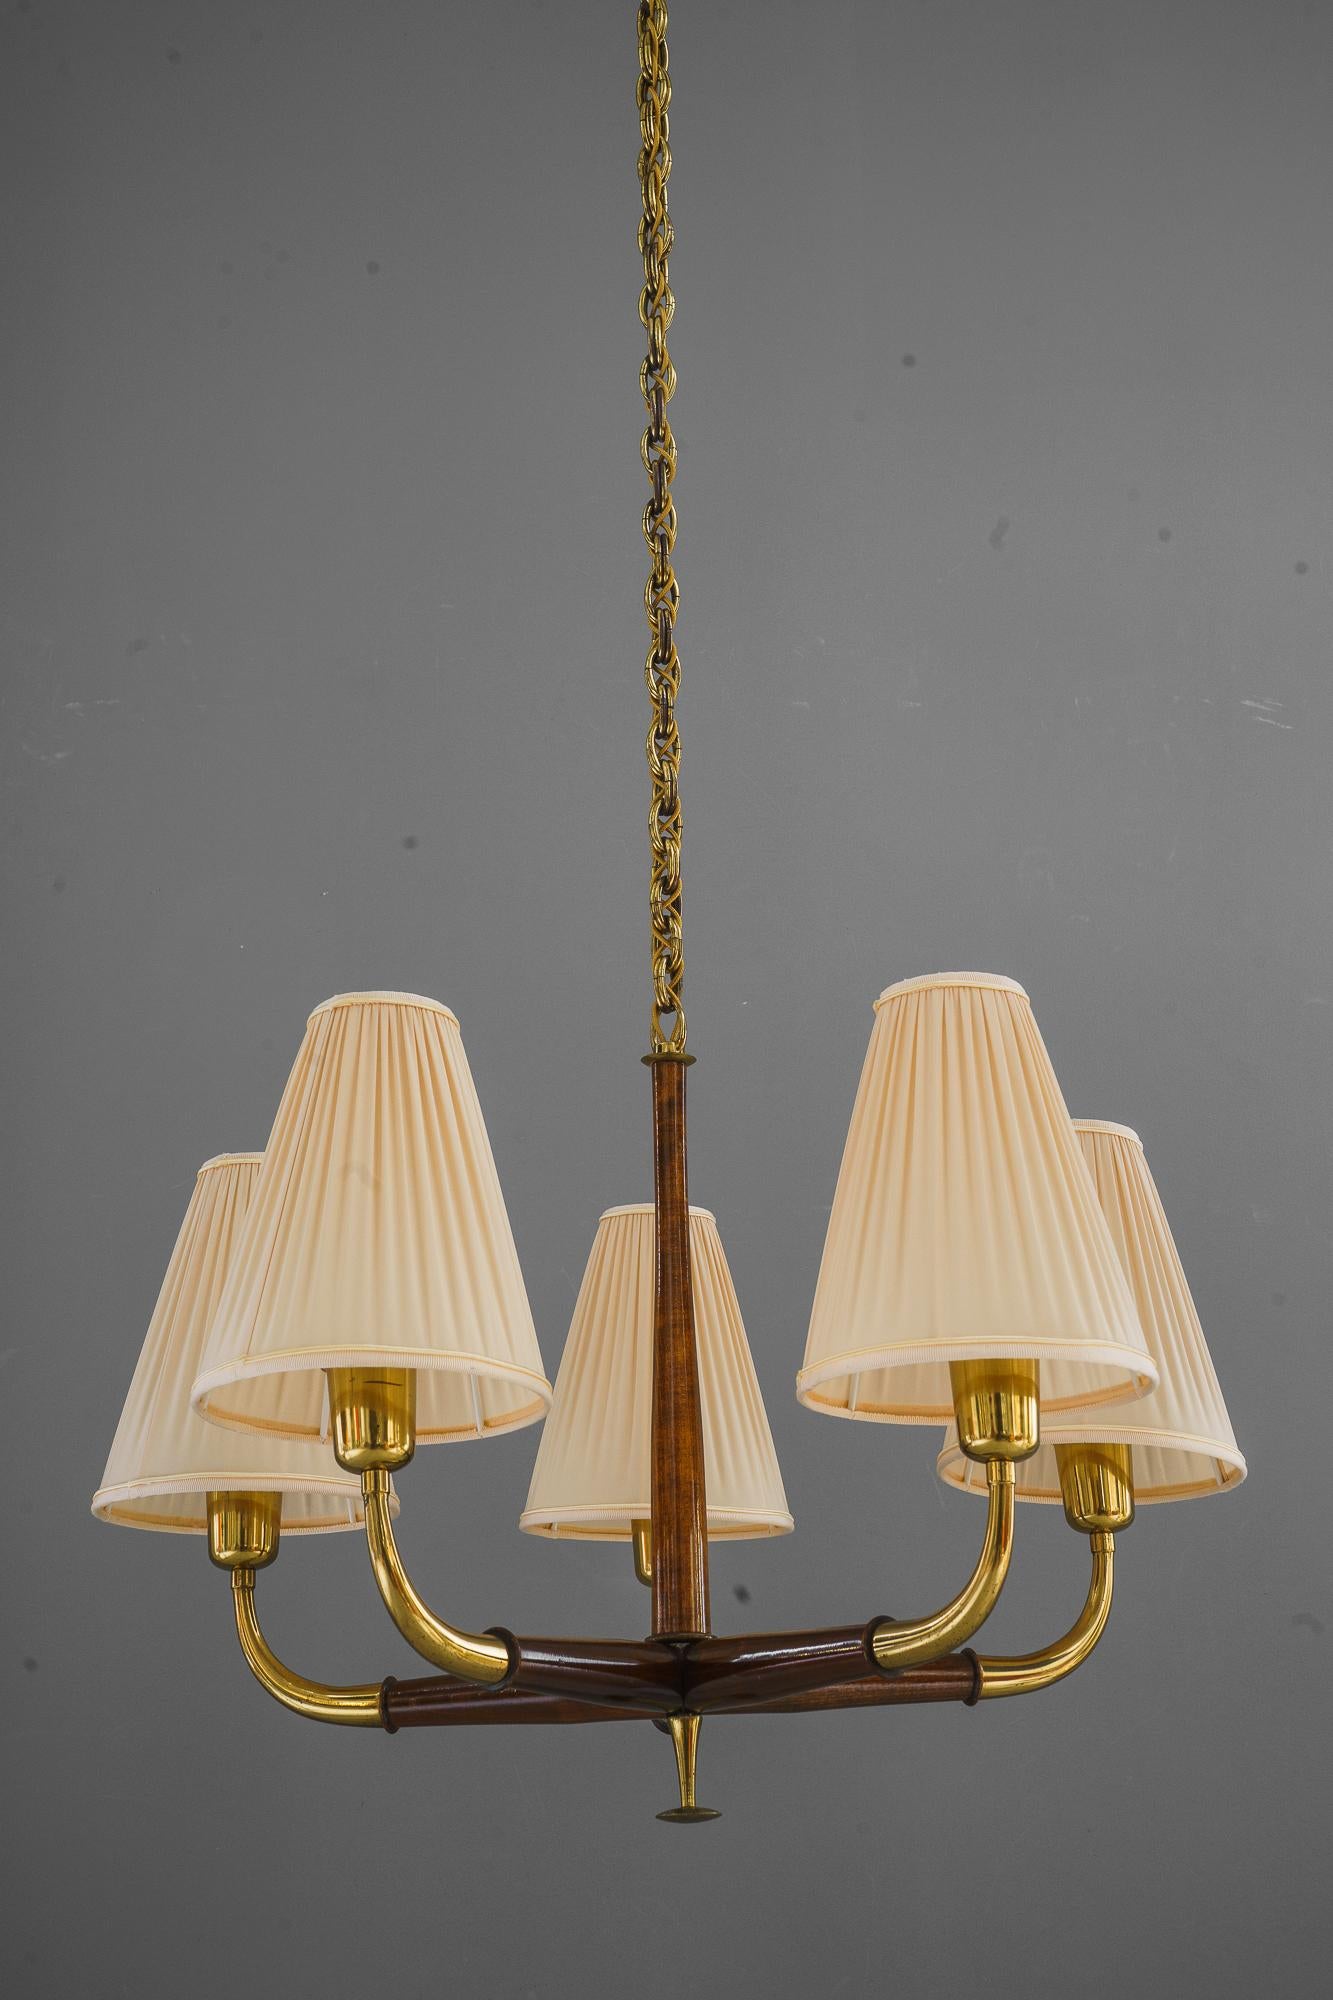 Mid-Century Modern Chandelier by Josef Frank, 1930s with fabric shades